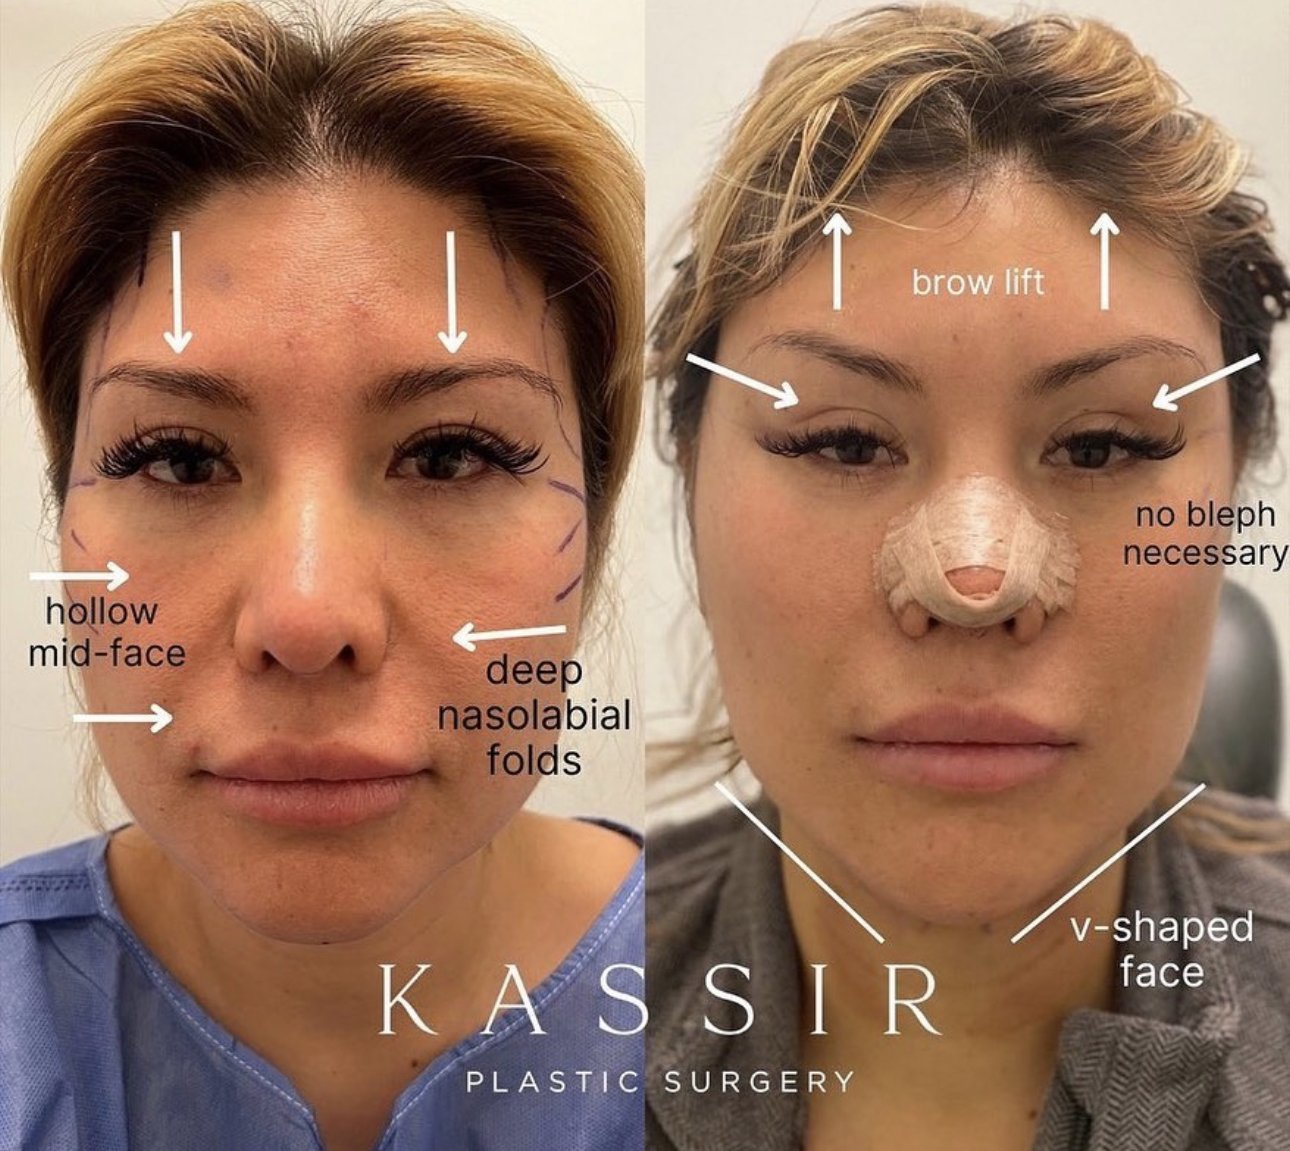 Scarless Face & Brow Lift — Kassir Plastic Surgery in NY and NJ